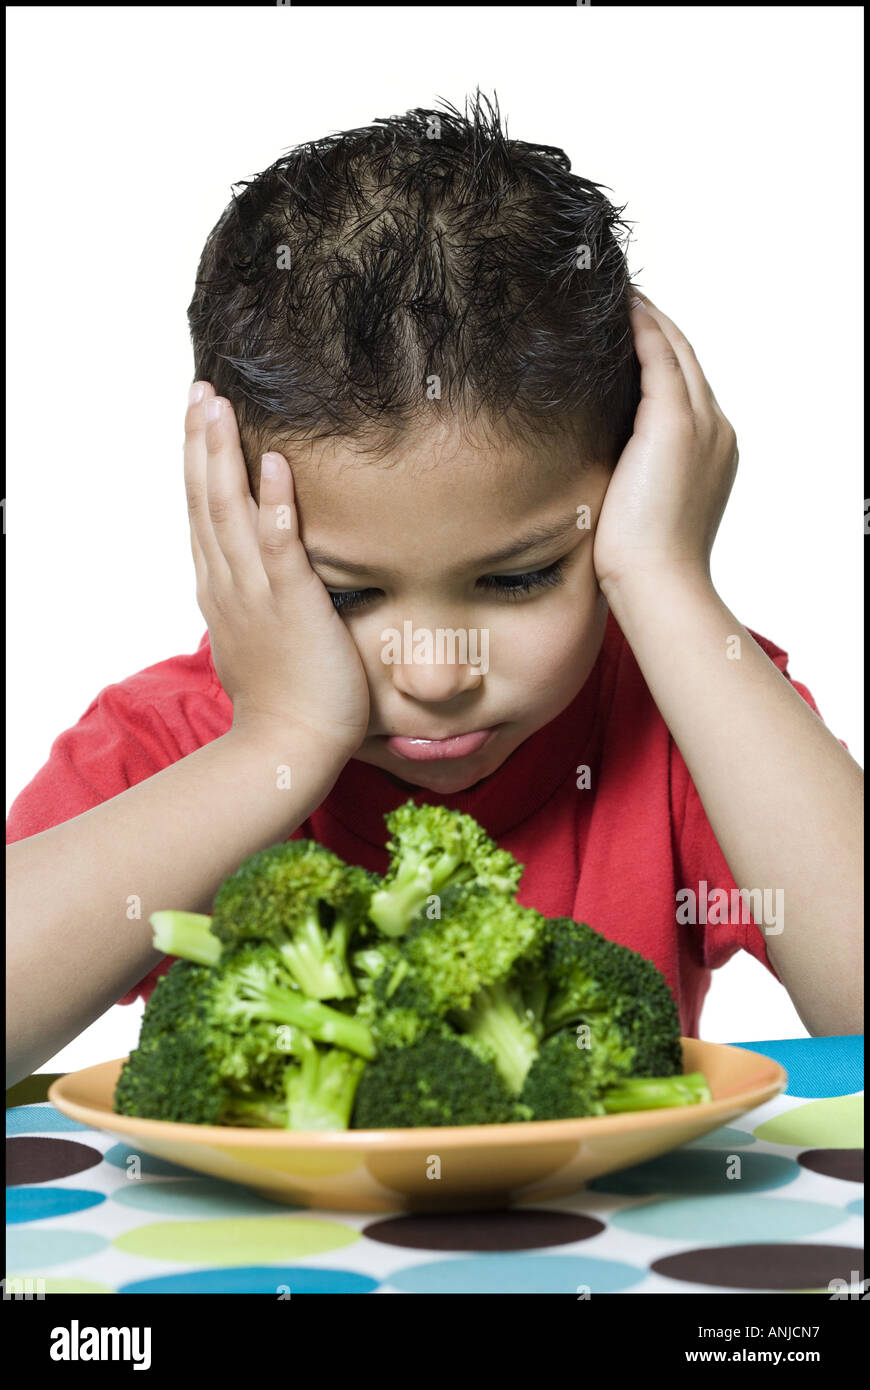 Close up of a boy looking at broccoli in a plate Stock Photo